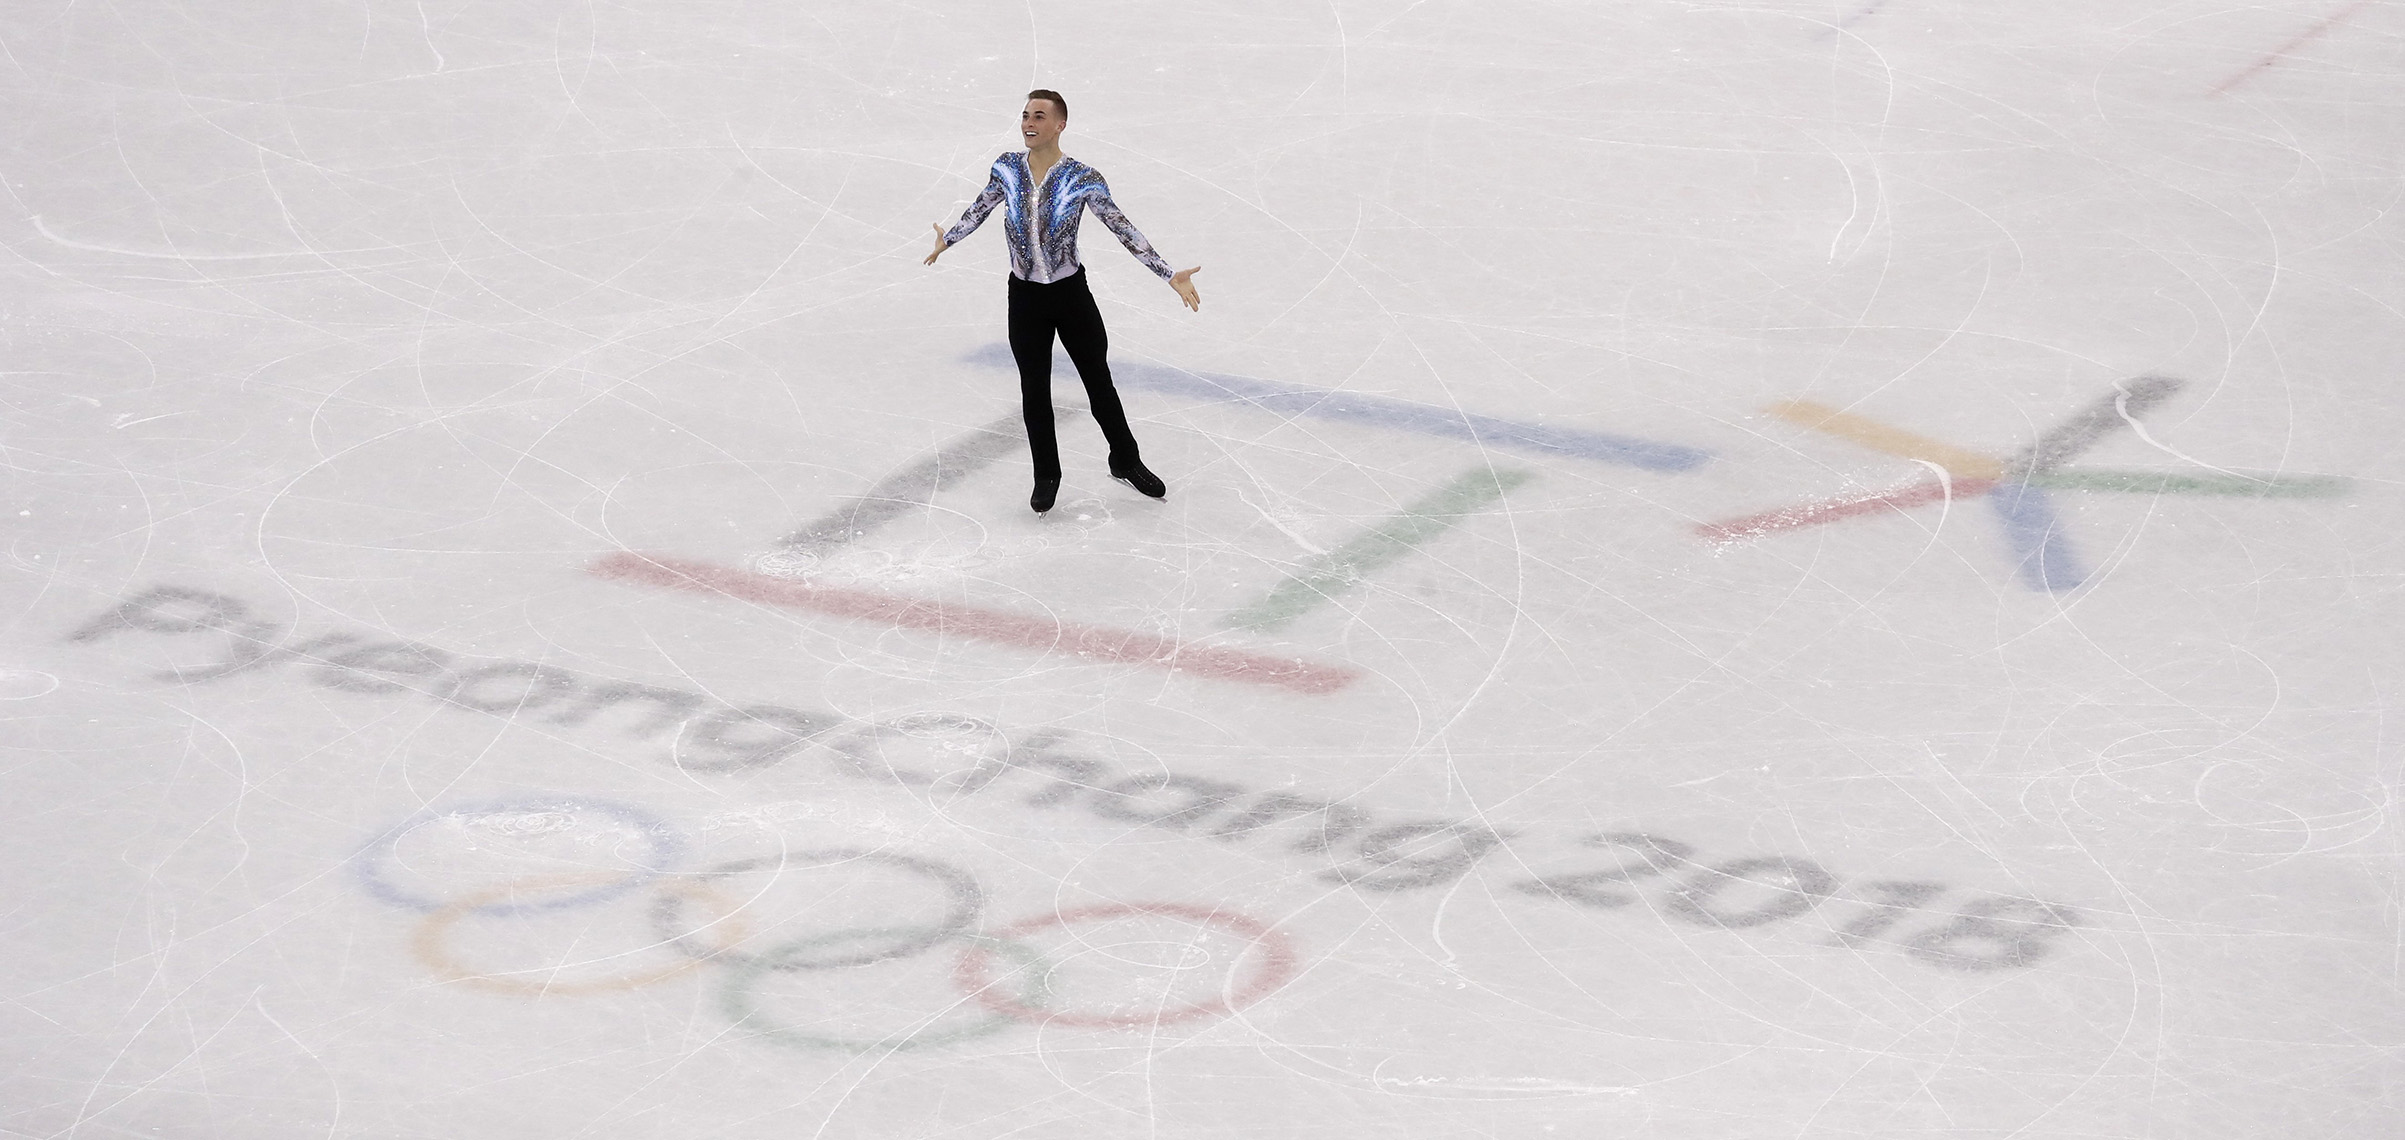 Adam Rippon of the United States performs in the men's single skating free skating in the Gangneung Ice Arena at the 2018 Winter Olympics in Gangneung, South Korea. (Morry Gash—AP/Shutterstock)